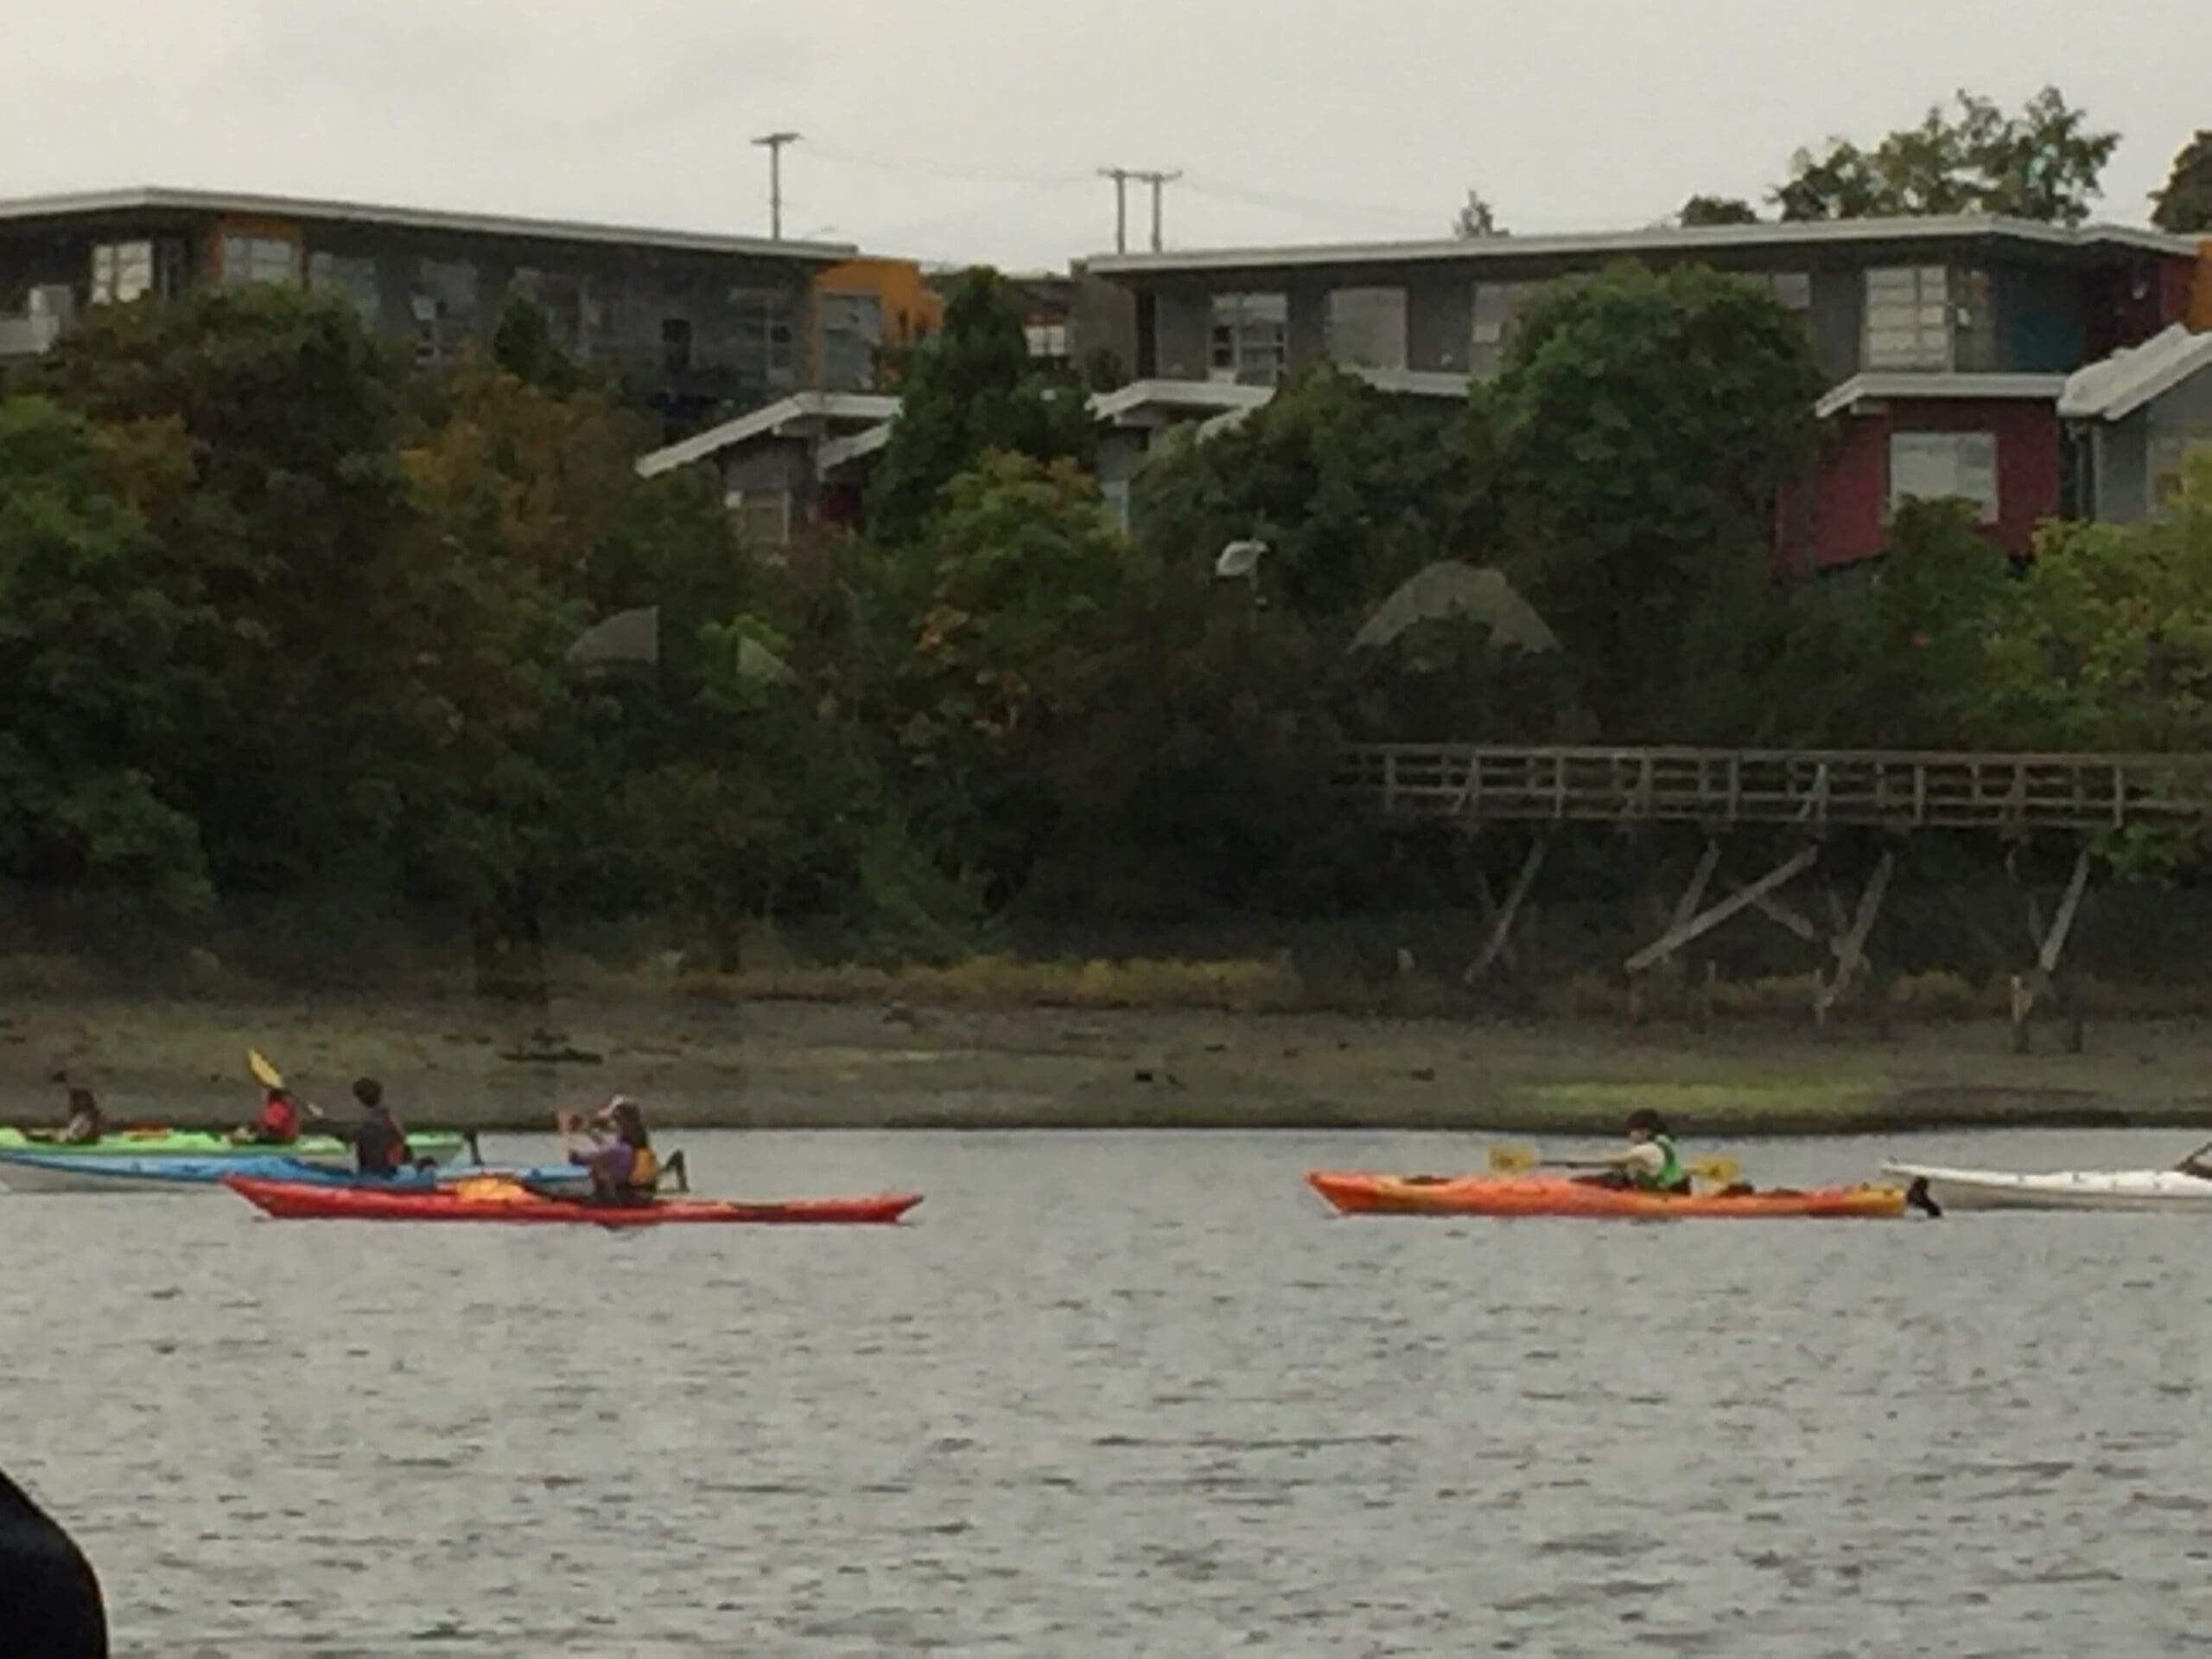 Kayaking is a fun and popular water activity in Victoria, both in the harbour and in the Gorge Waterway.